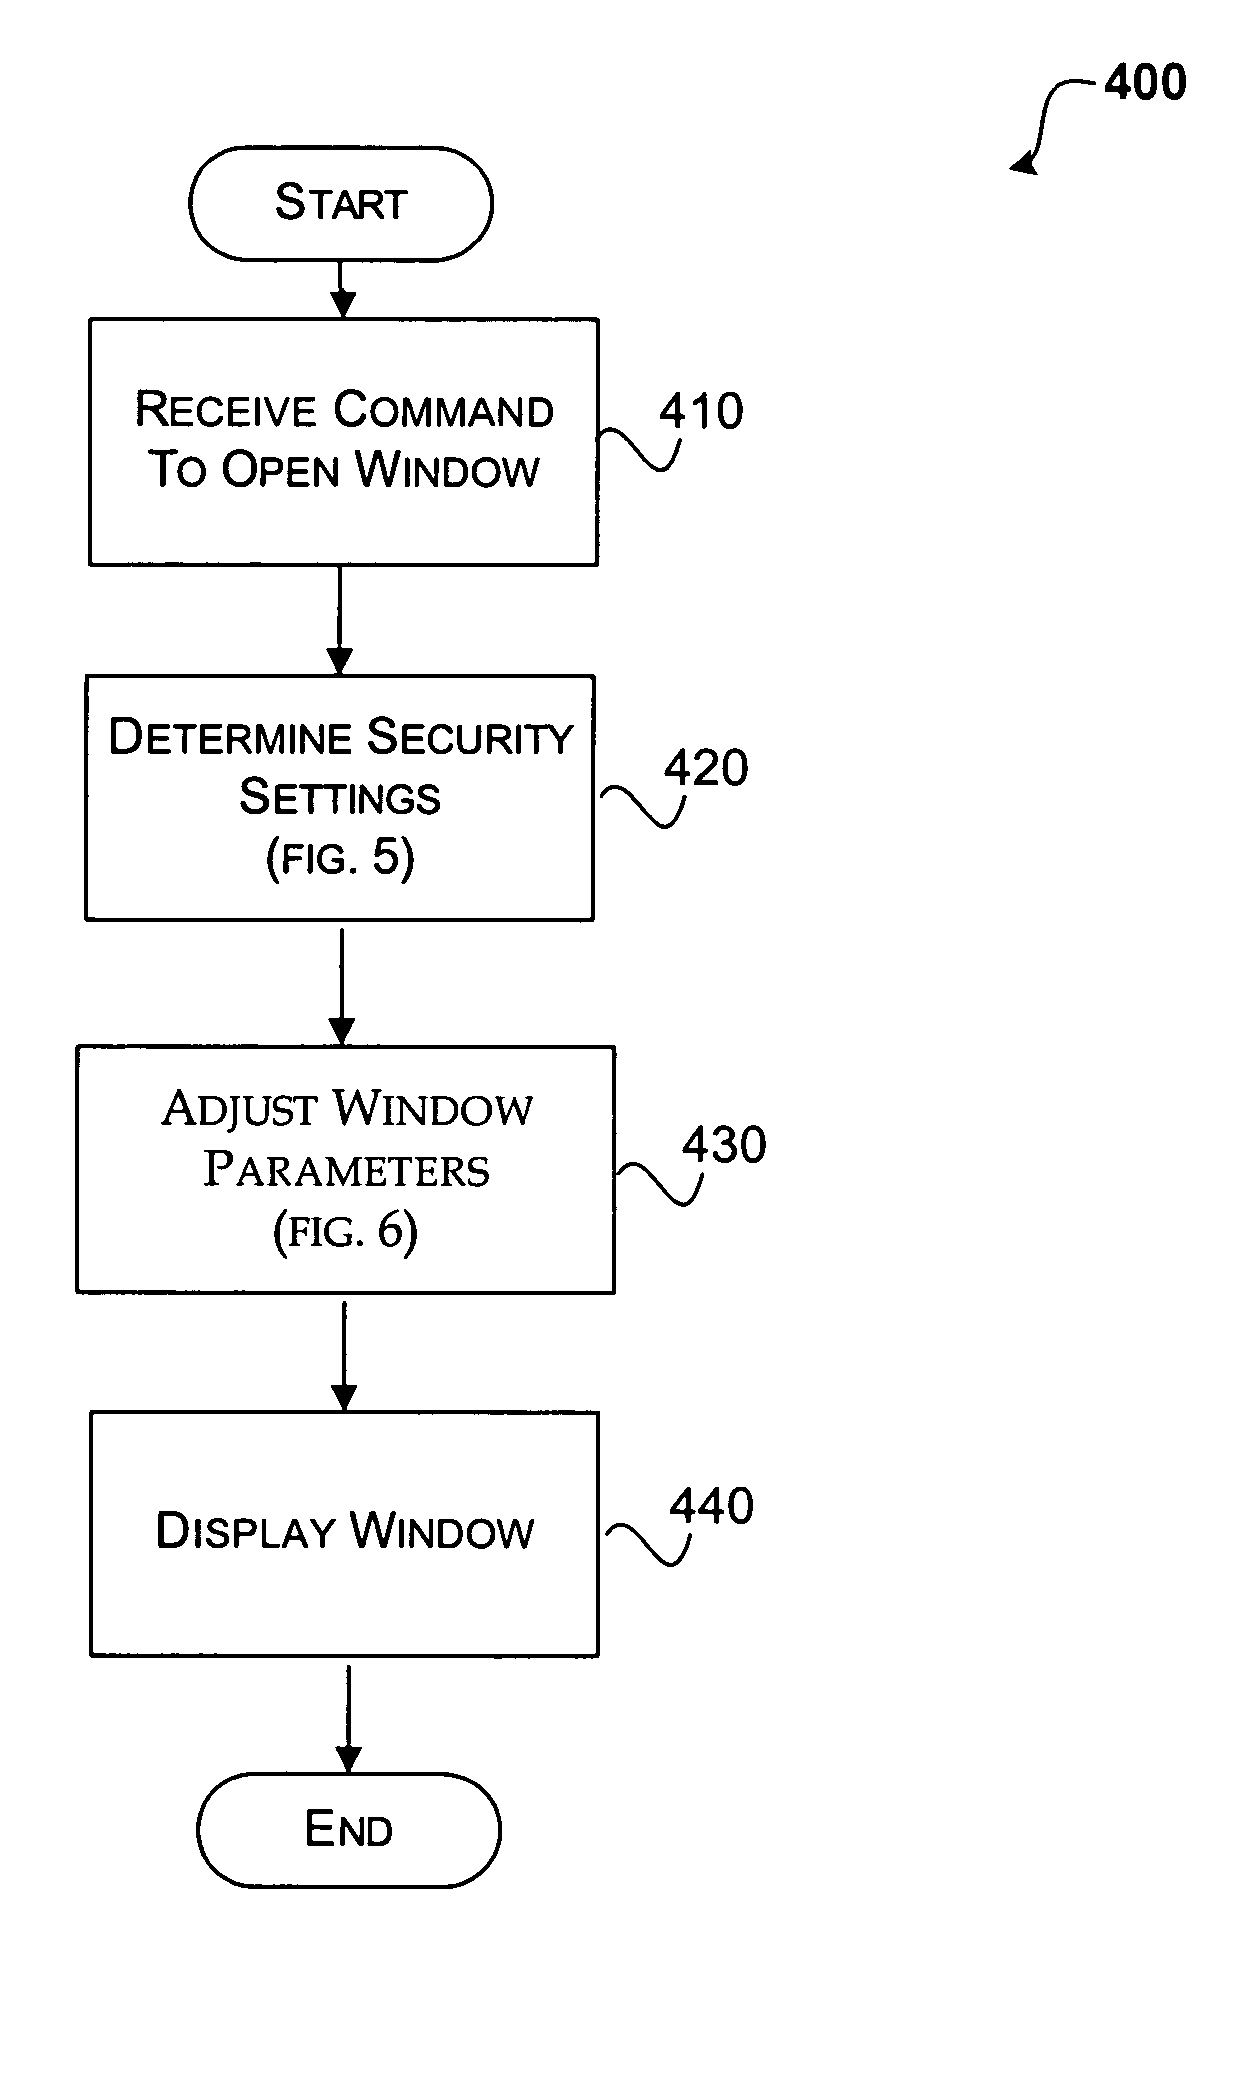 Displaying a security element with a browser window